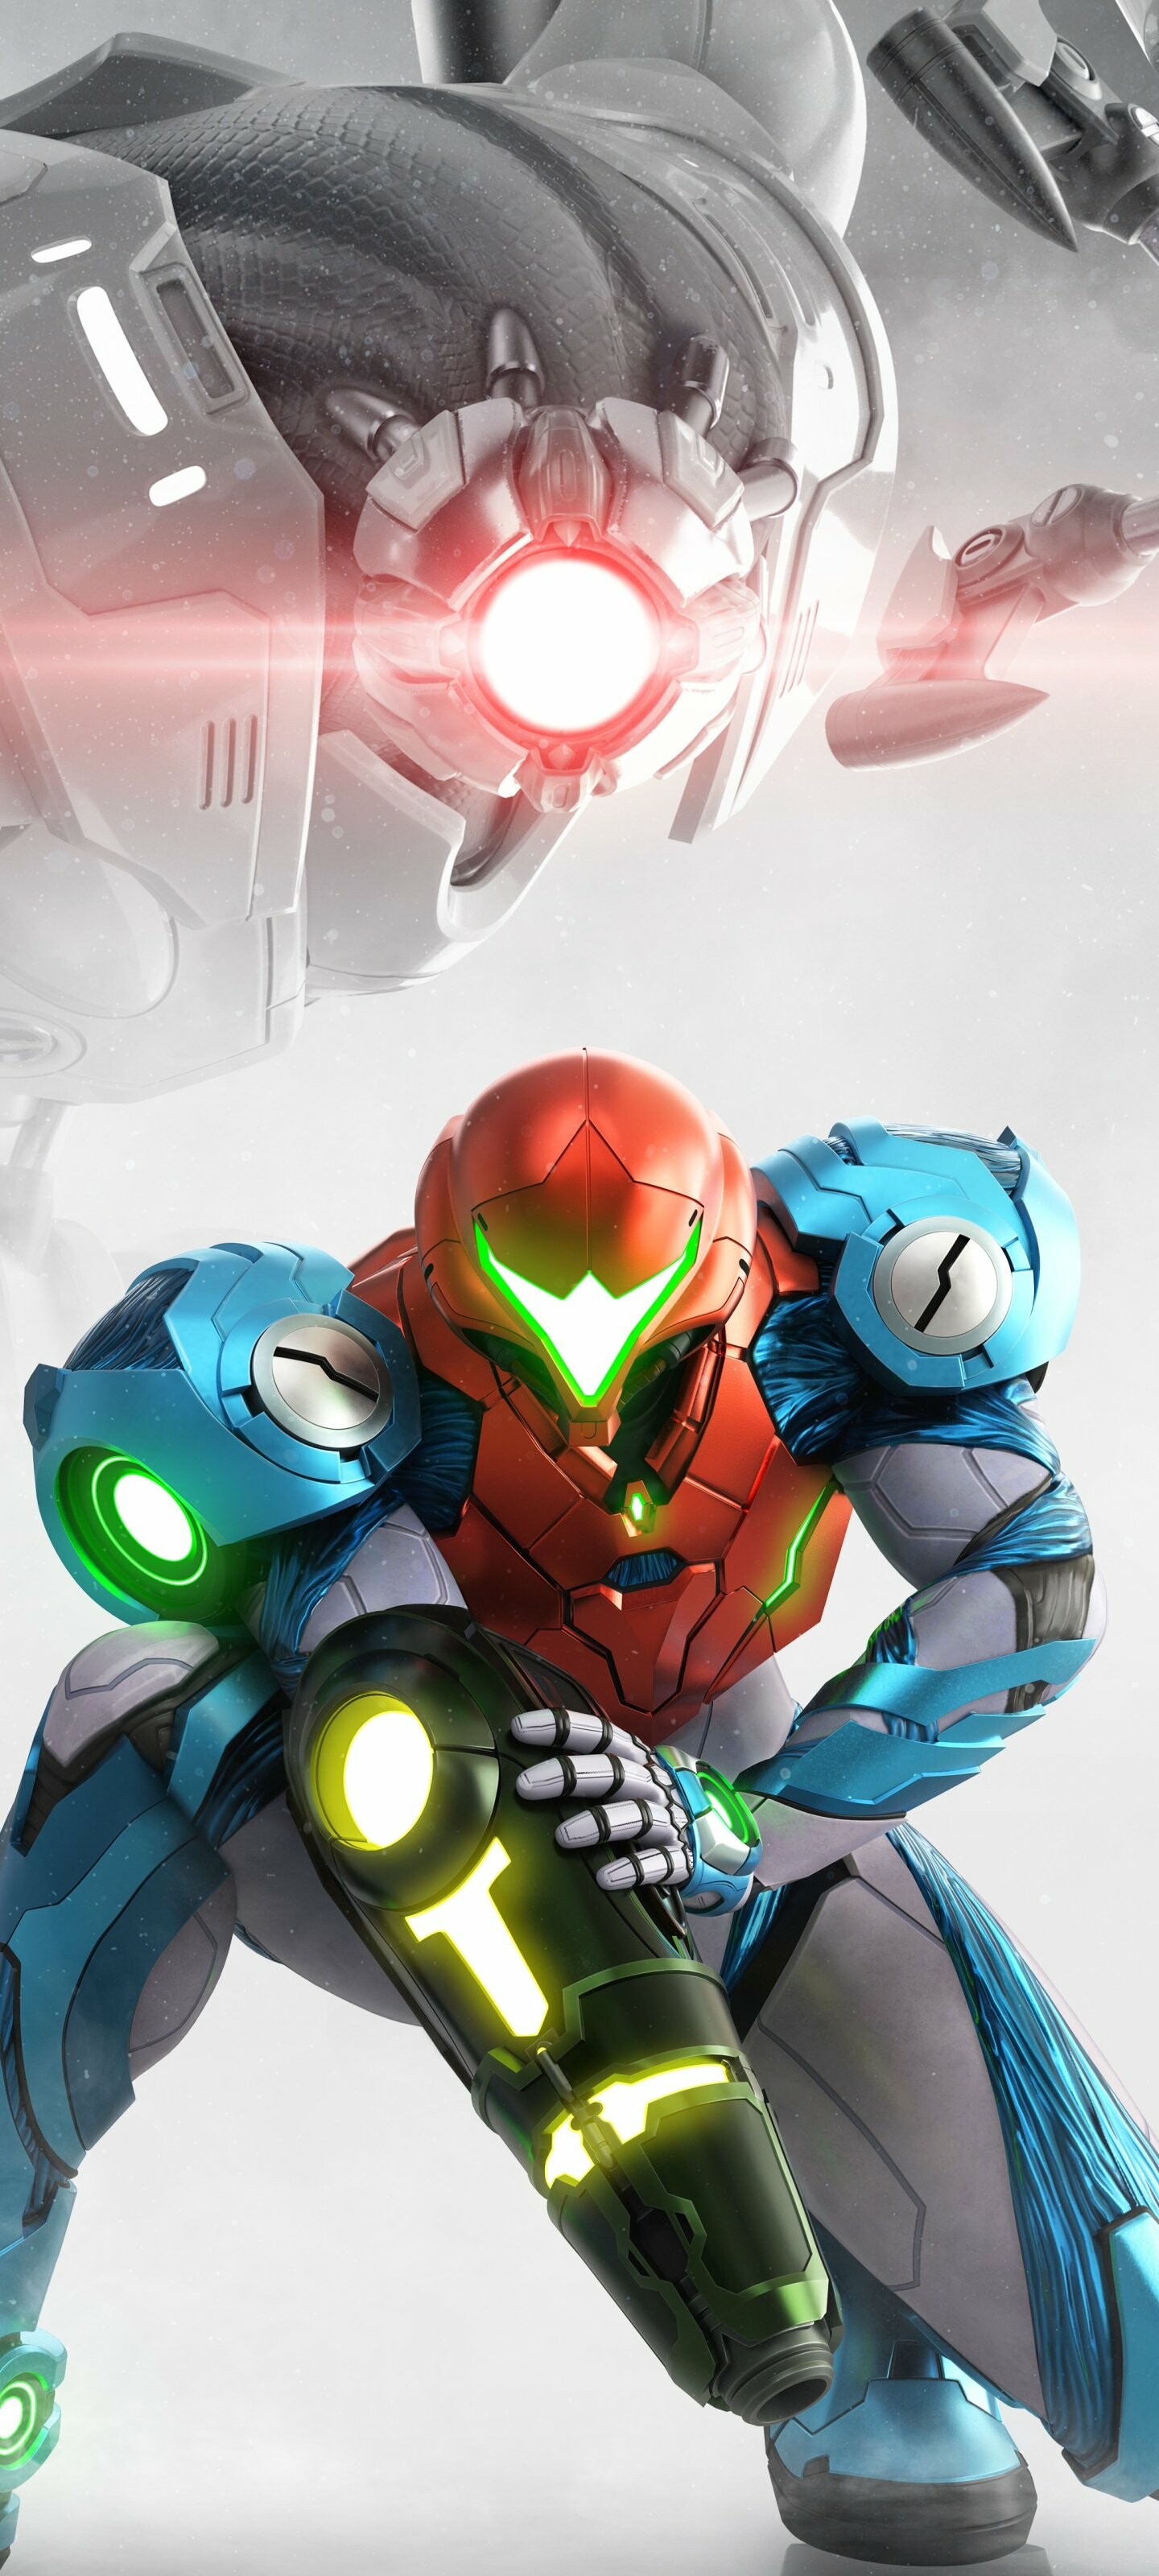 Metroid Dread: At the Golden Joystick Awards, the game won in the category Nintendo Game of the Year. 1440x3200 HD Wallpaper.